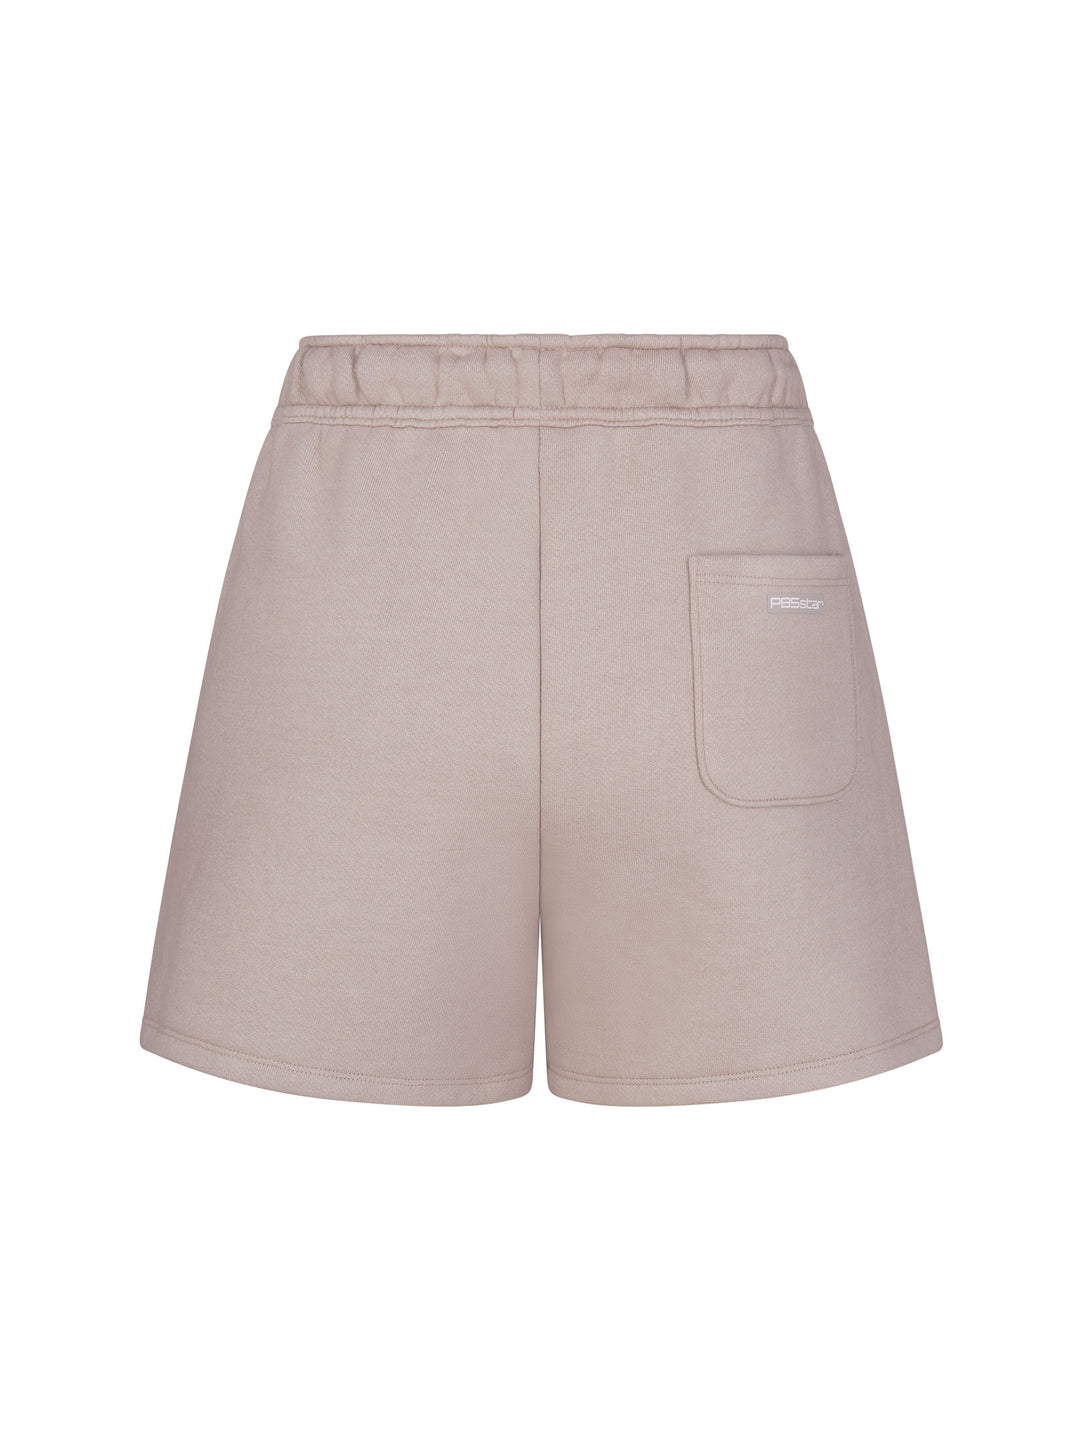 Women's Luxe Lounge Short back view in soft clay. Pocket on right leg with small logo at the top of the pocket.